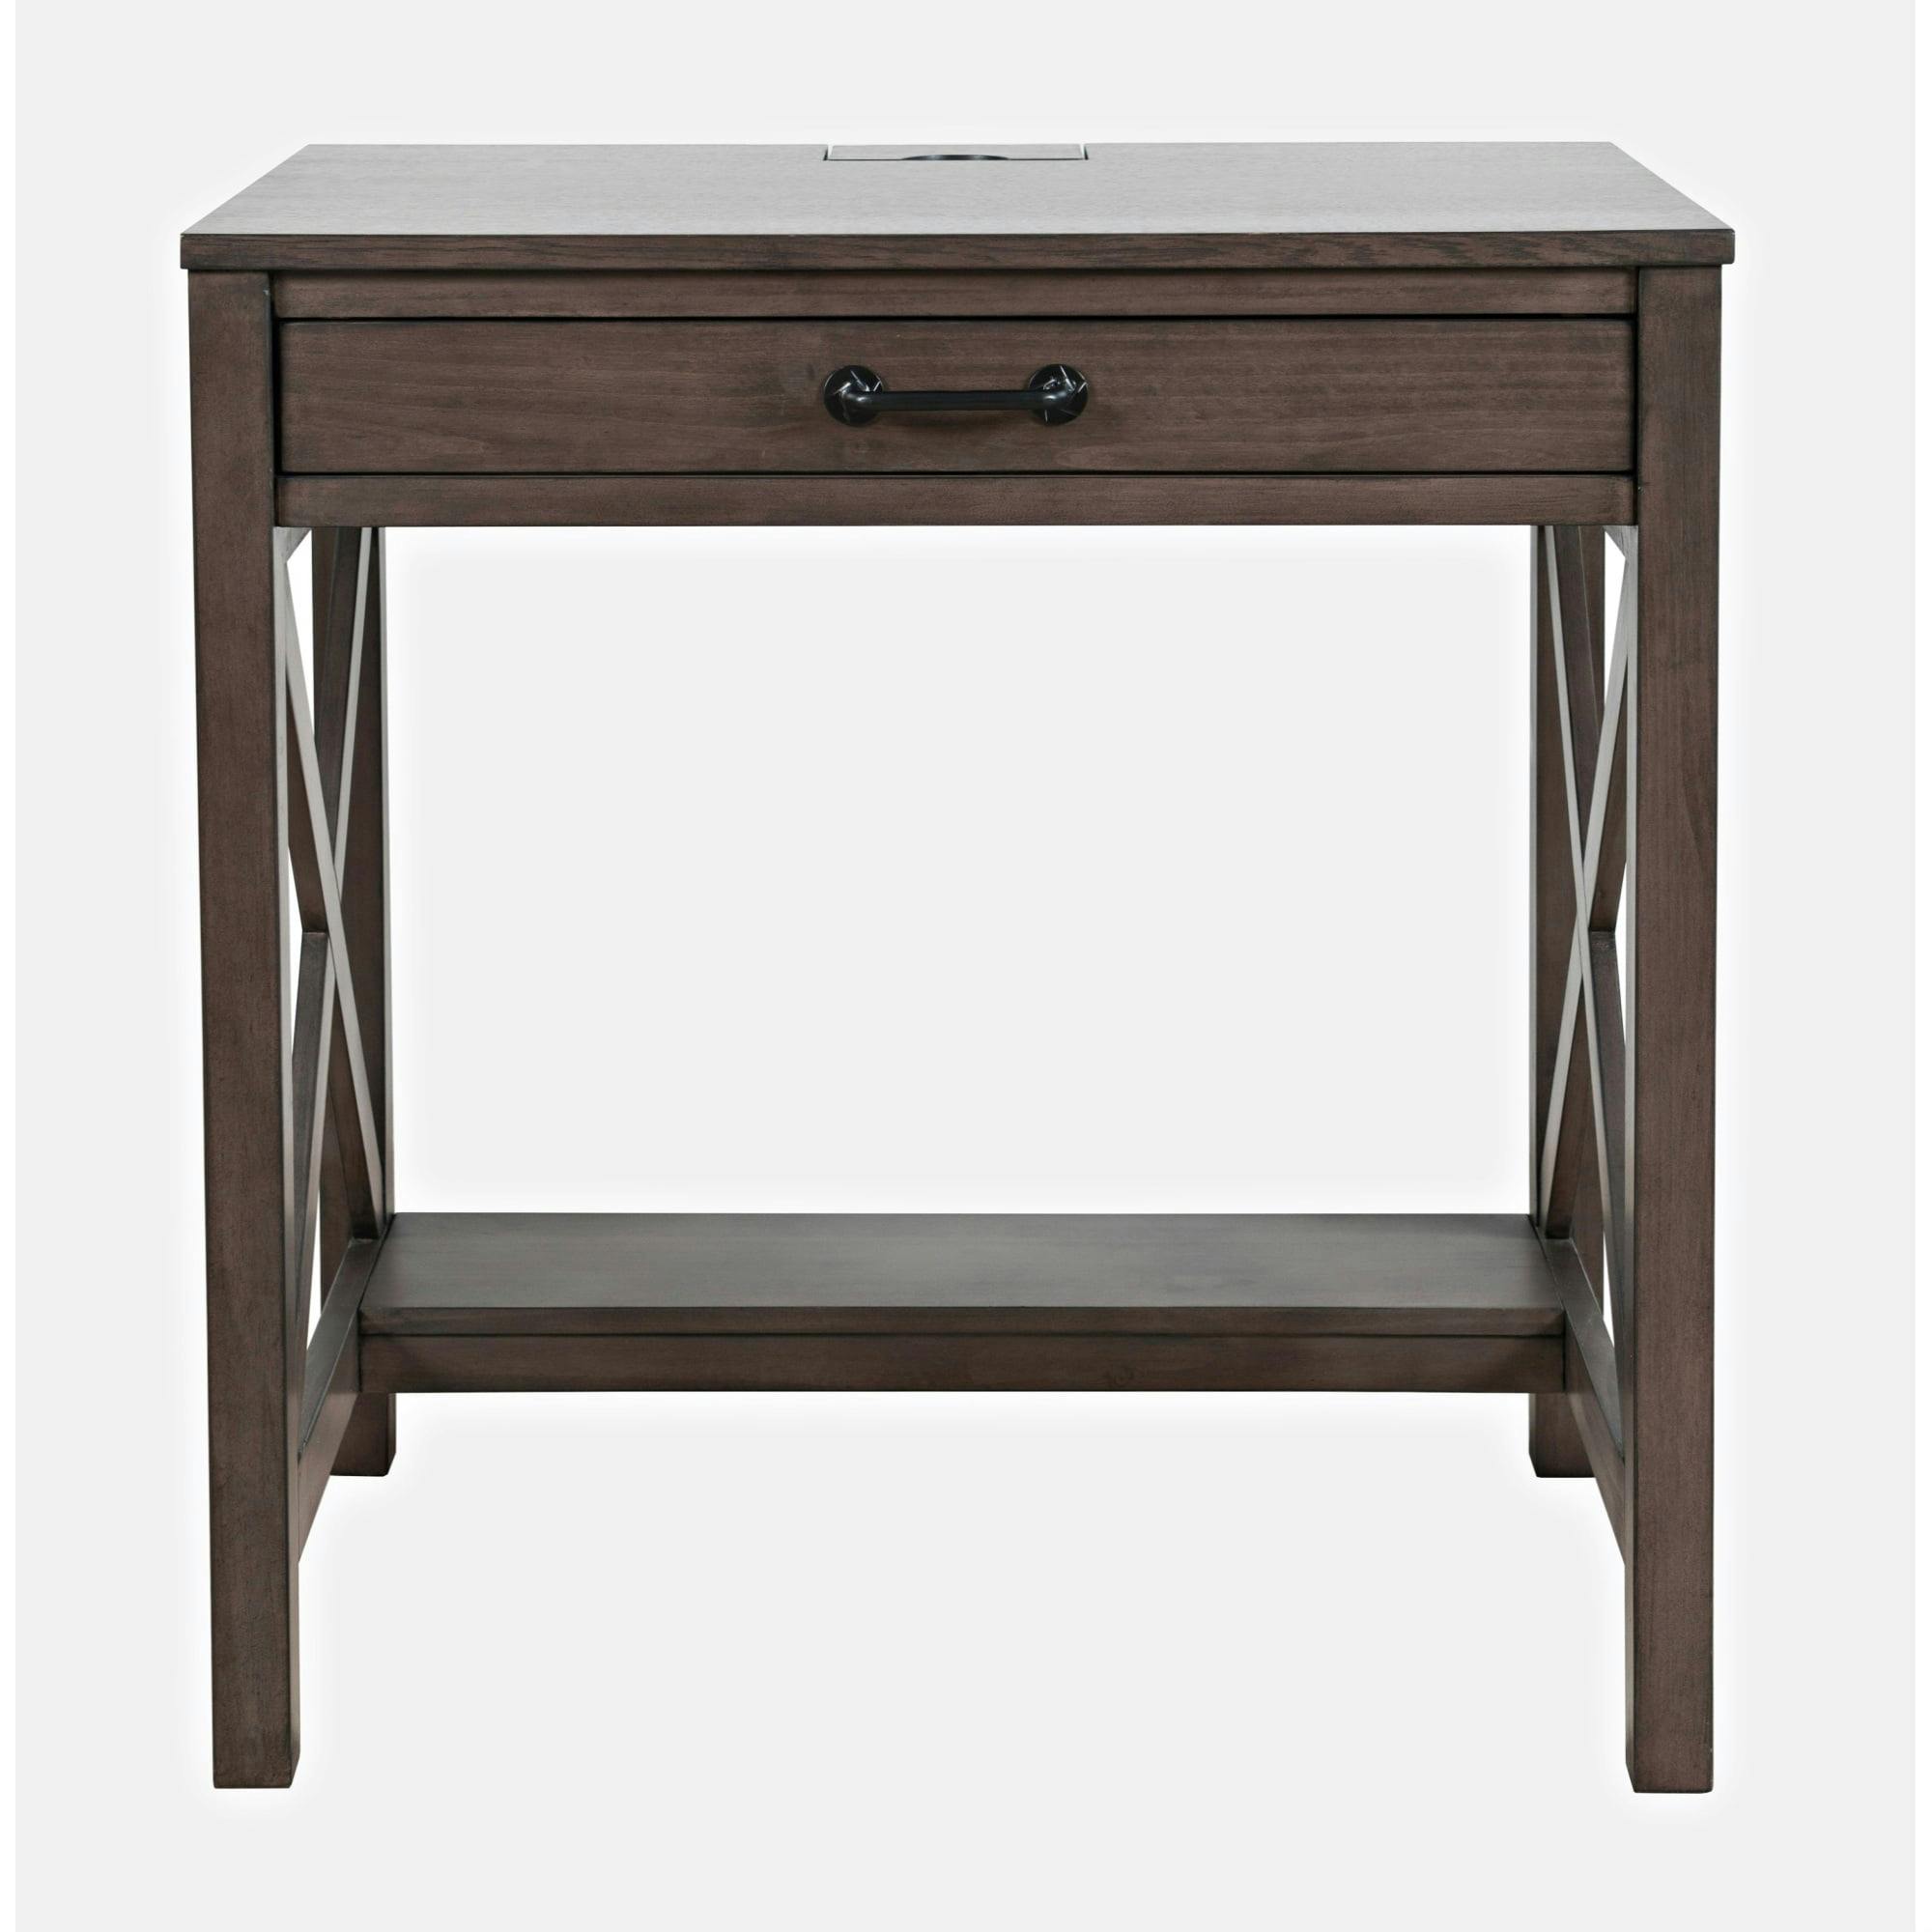 Transitional Hobson Desk with USB Charging Ports and Drawer in Gray/Brown